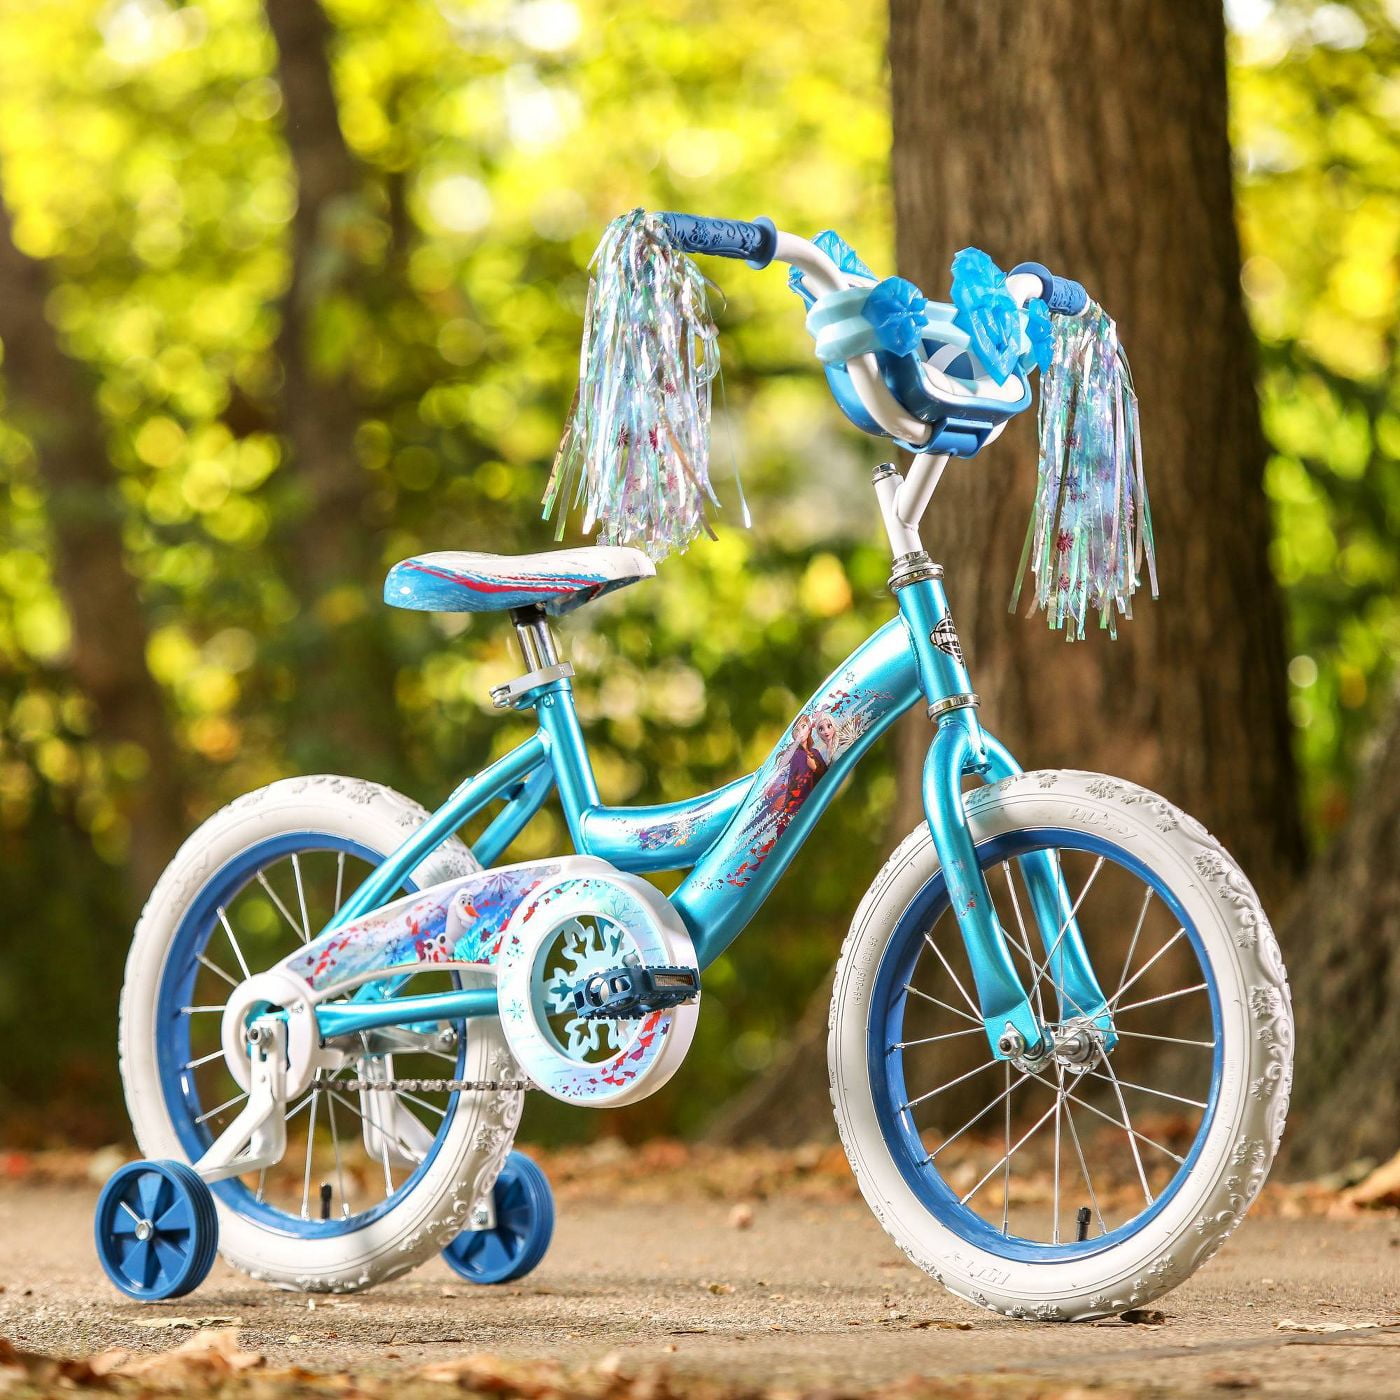 Huffy Frozen II 2 Pedal Trike Tricycle Blue Bike Toddler Girl Kid Anna Elsa Olaf for sale online 